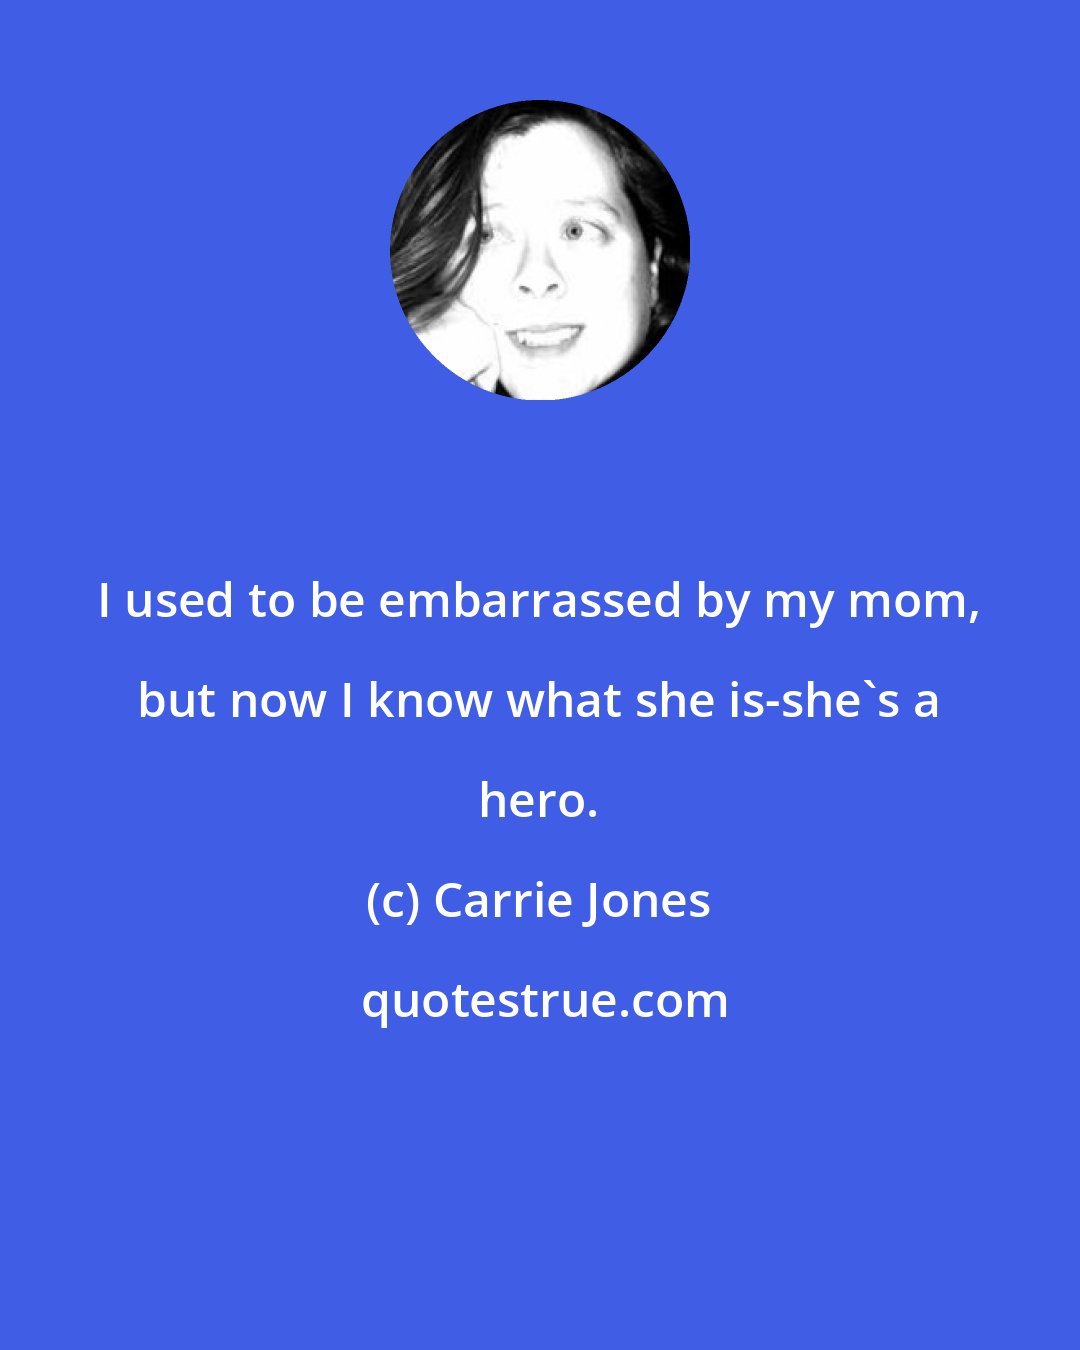 Carrie Jones: I used to be embarrassed by my mom, but now I know what she is-she's a hero.